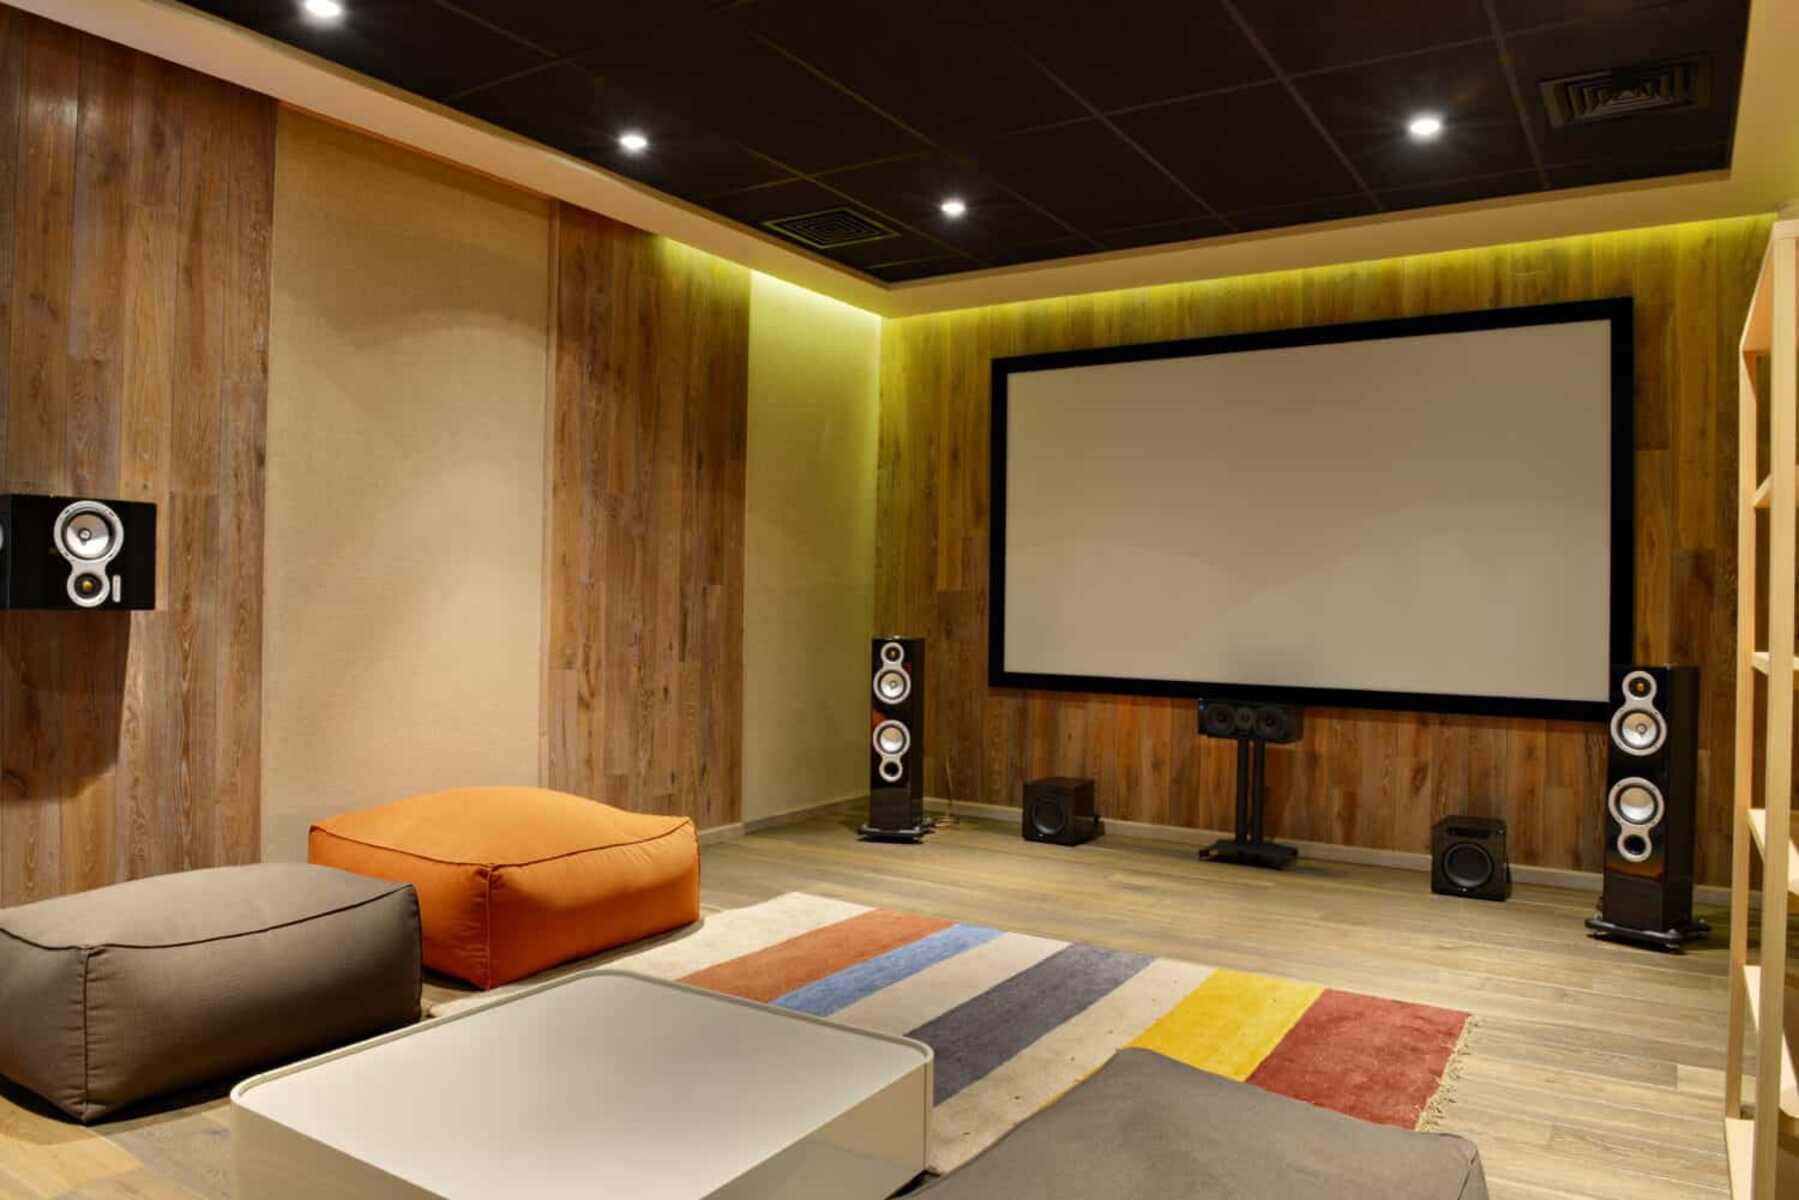 What Is The Best Scene For Surround Sound System